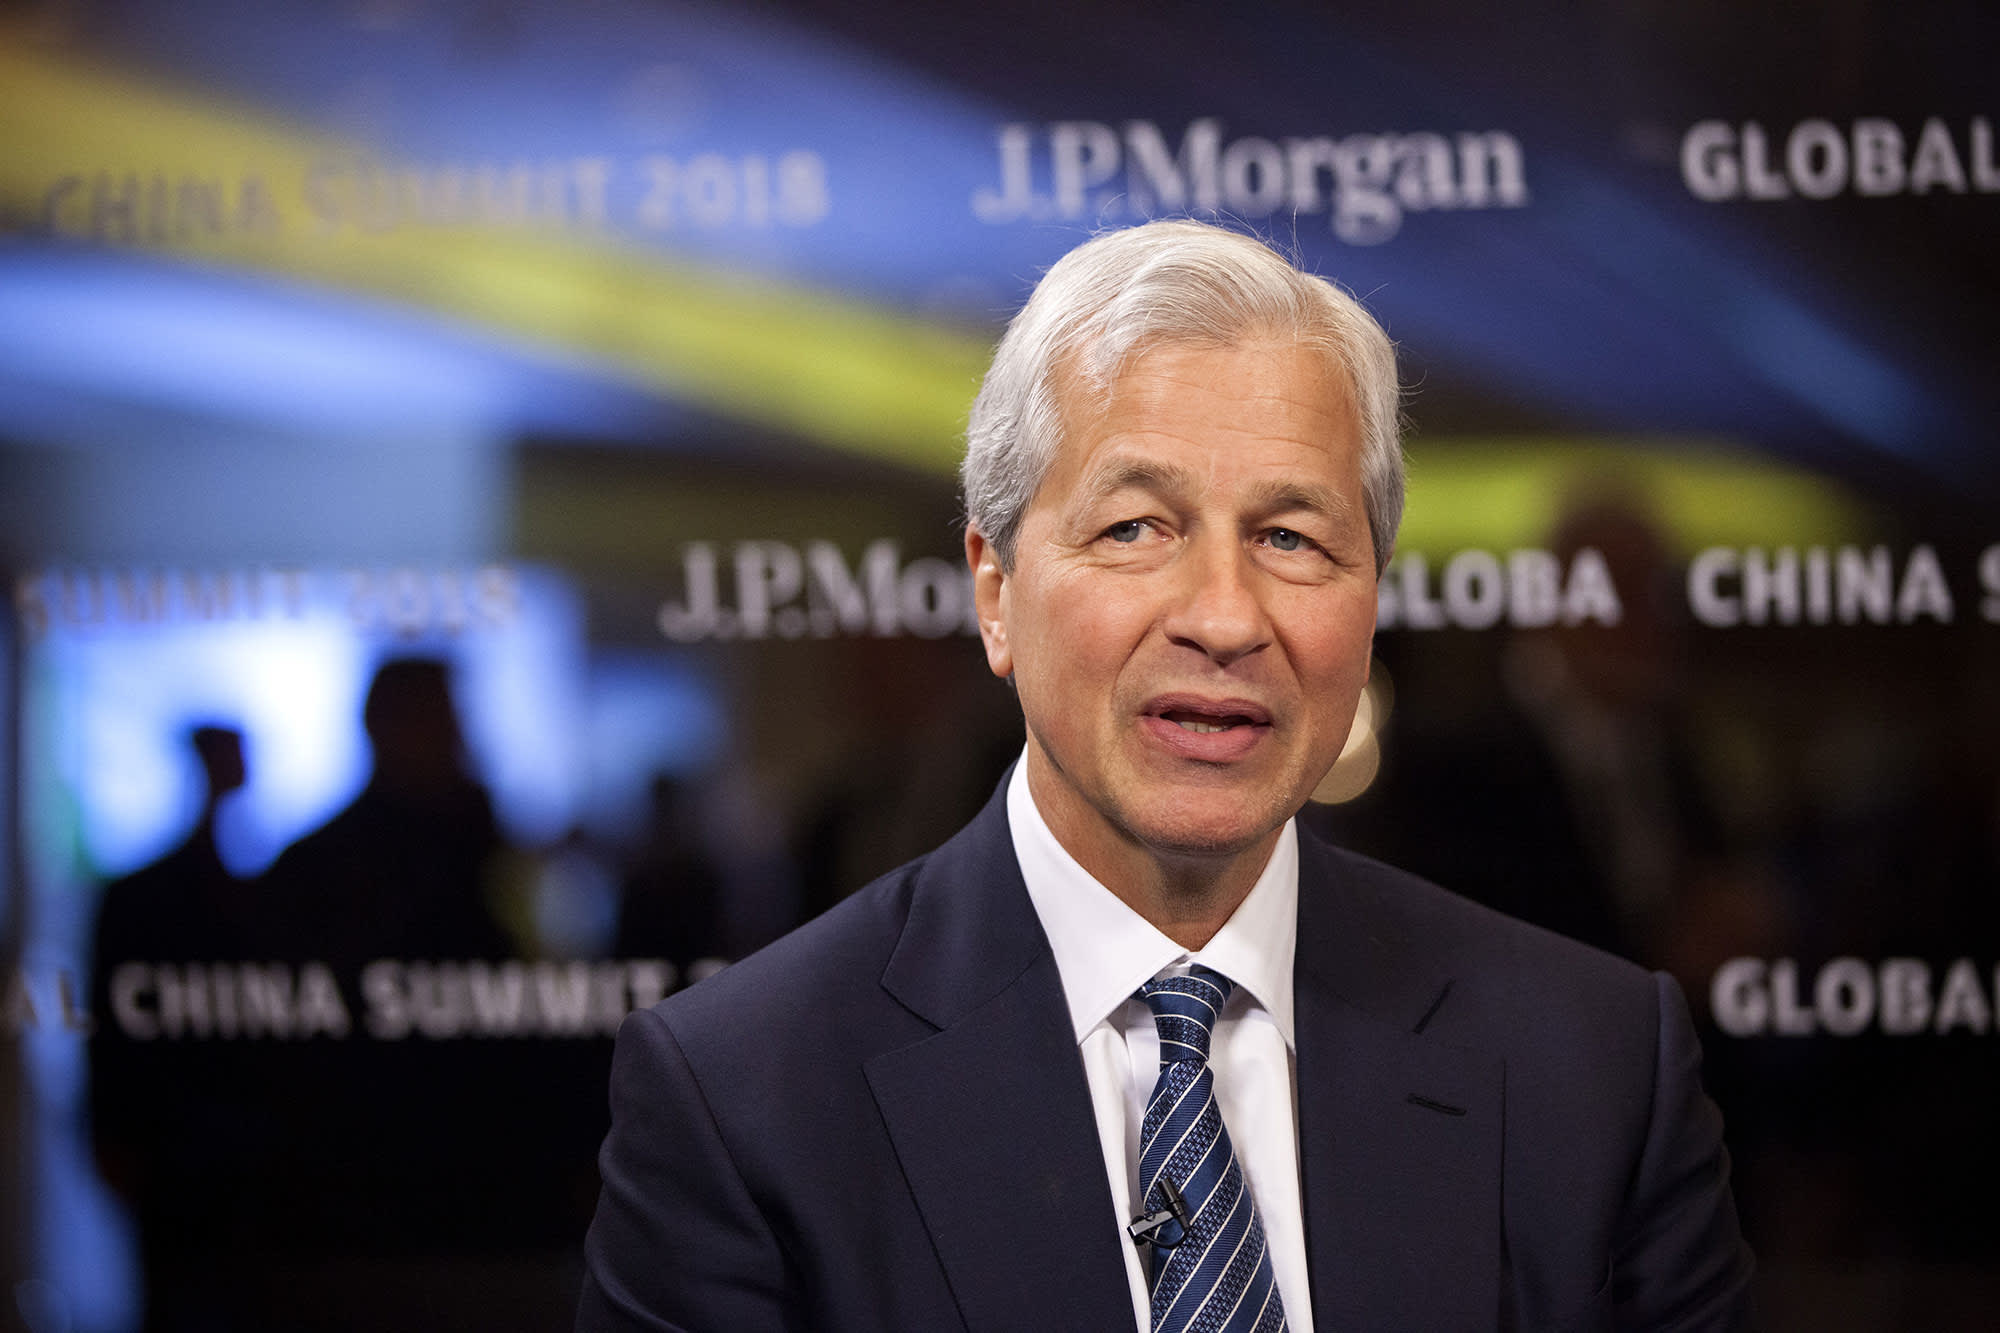 JPMorgan CEO Jamie Dimon: People with these traits succeed -- 'not the smartest or hardest-working in the room'